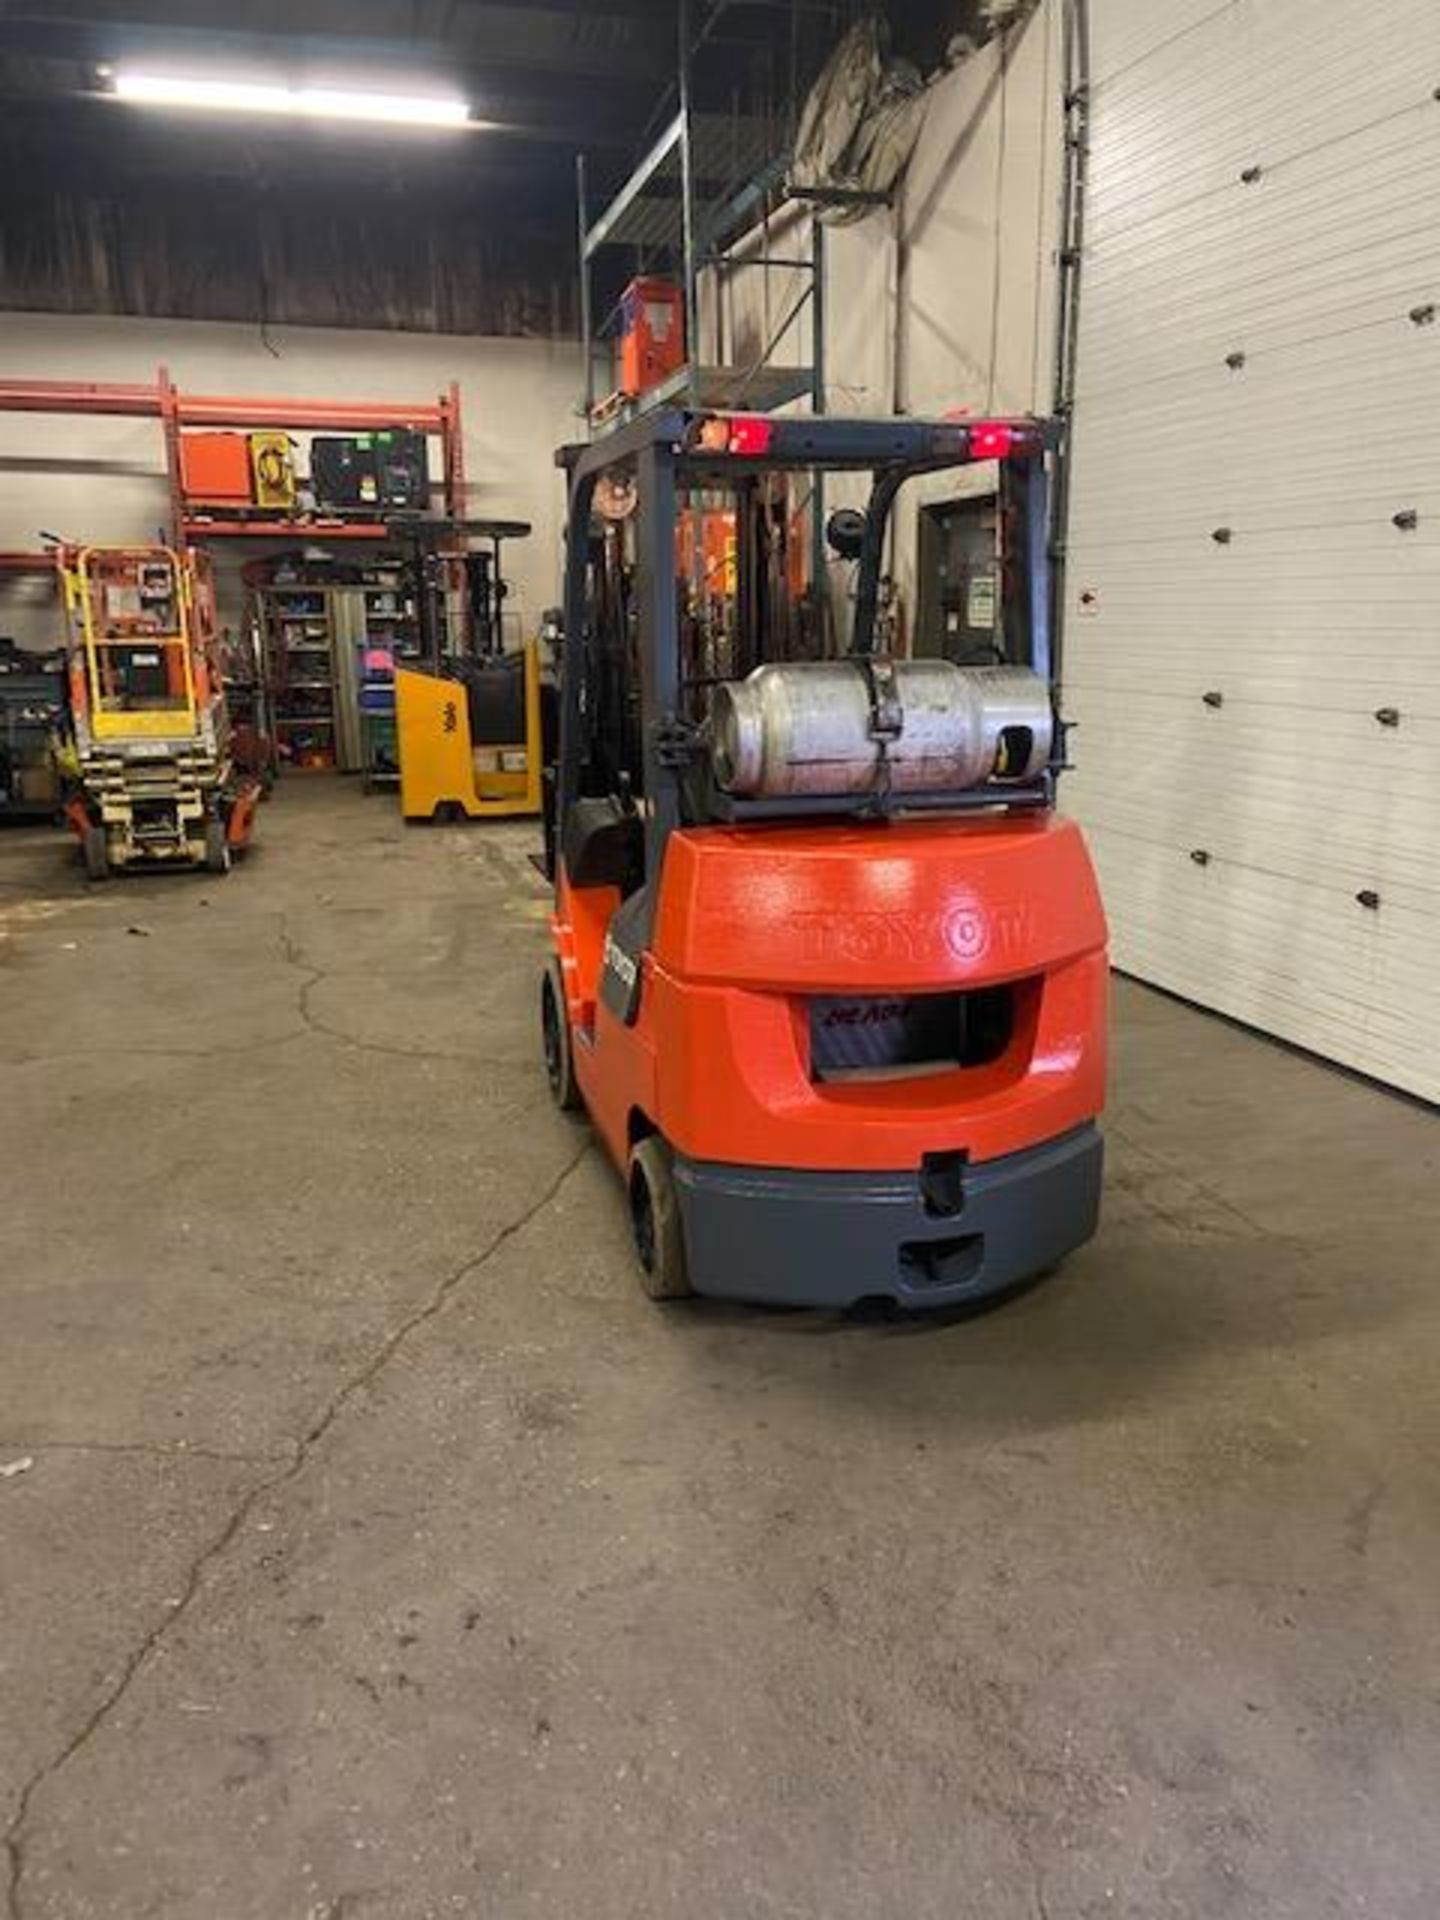 FREE CUSTOMS - Toyota 5000lbs capacity LPG (propane) Forklift with sideshift and 3-stage Mast - Image 3 of 3